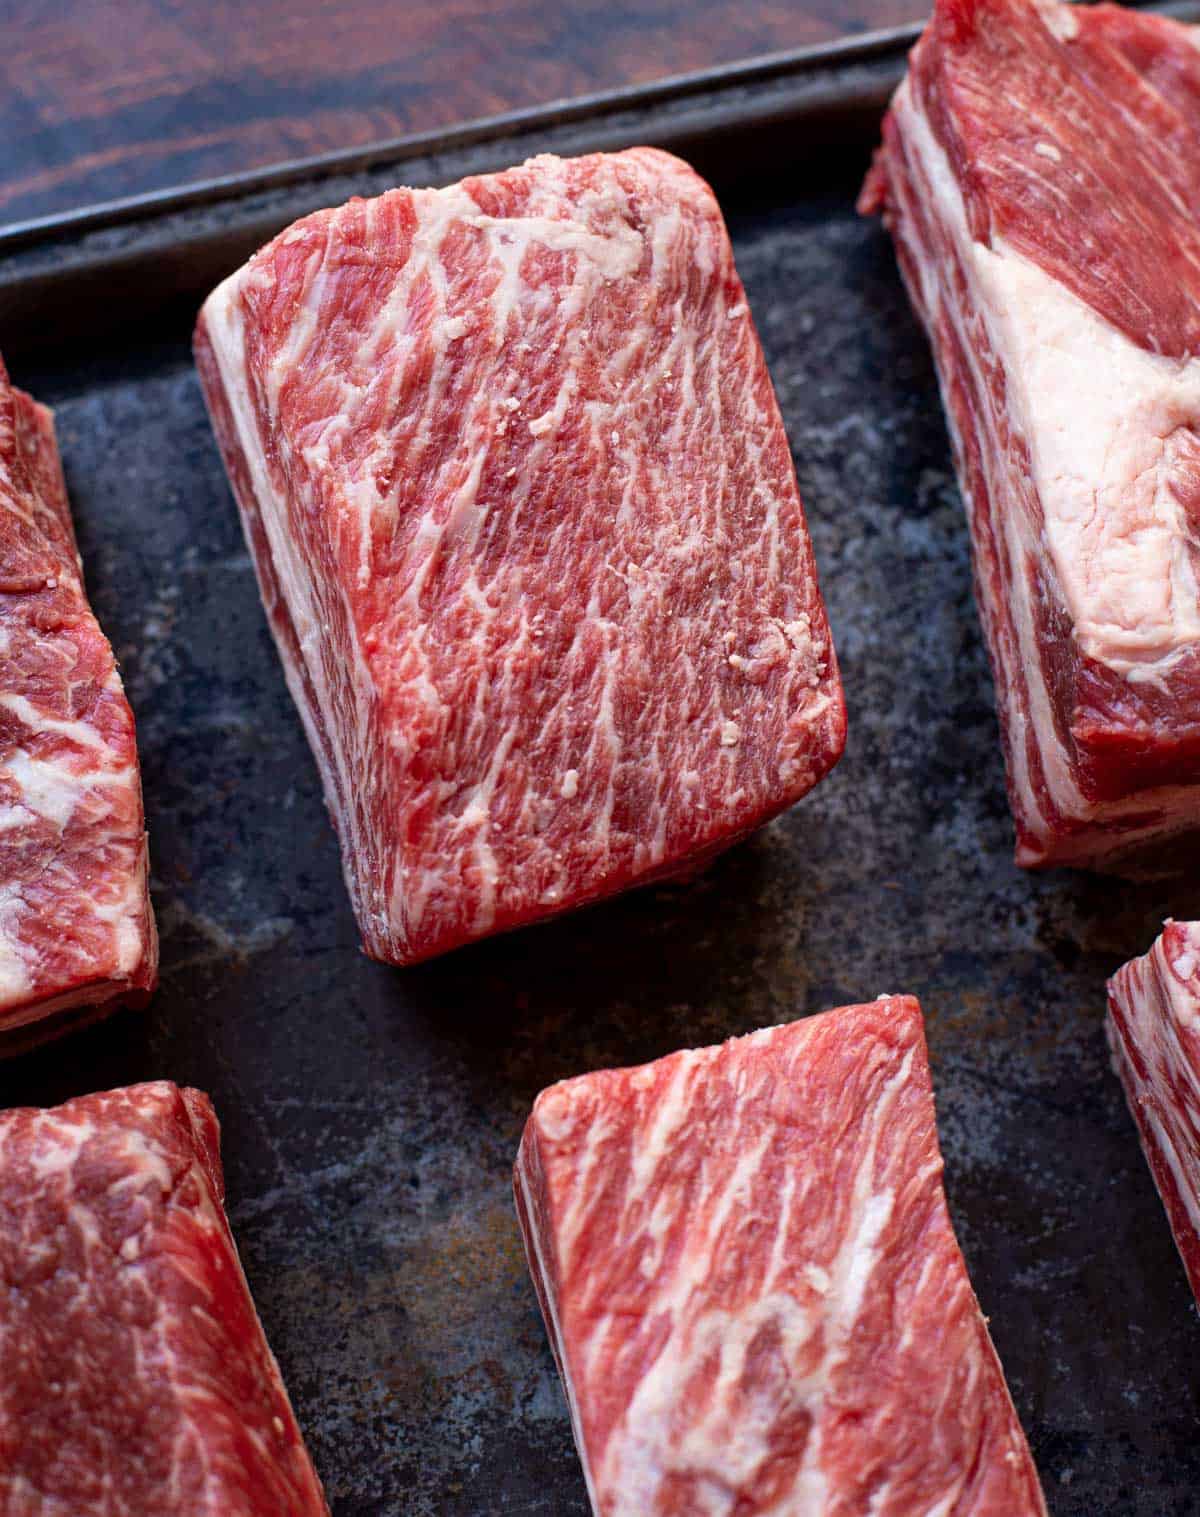 Raw and trimmed beef short ribs.